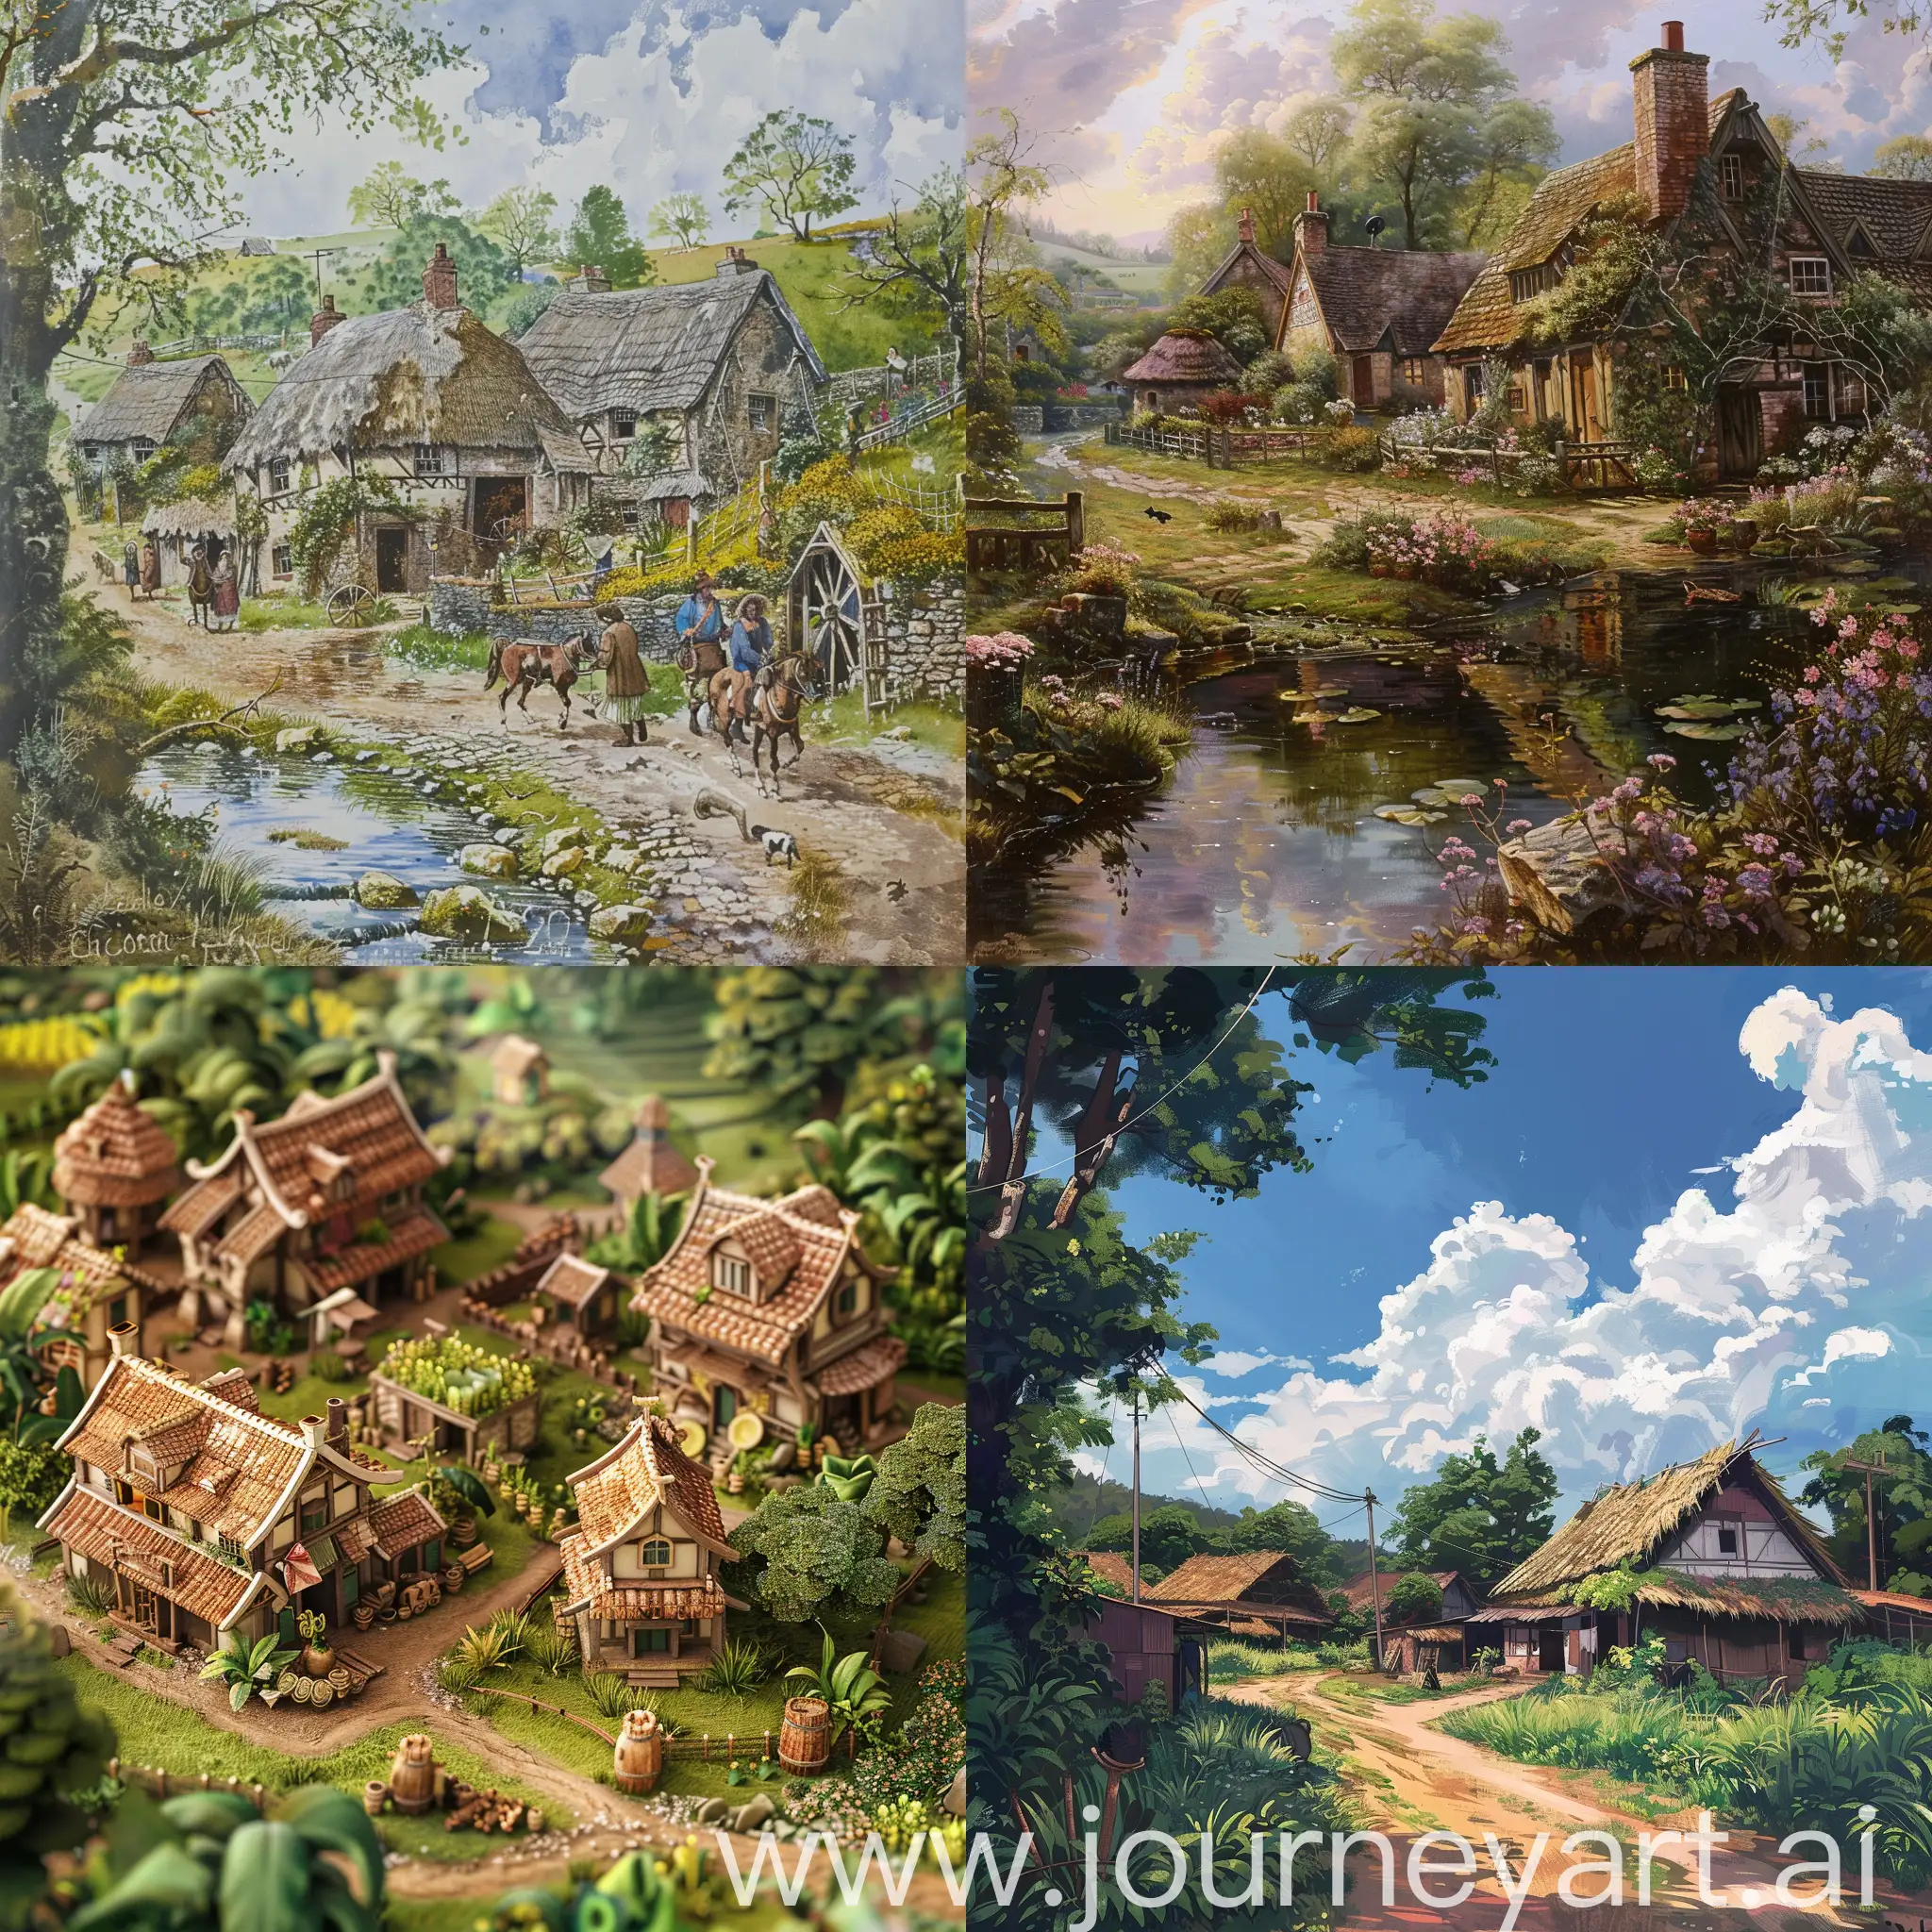 Vibrant-Village-Life-Scene-Cozy-Houses-and-Lively-Activity